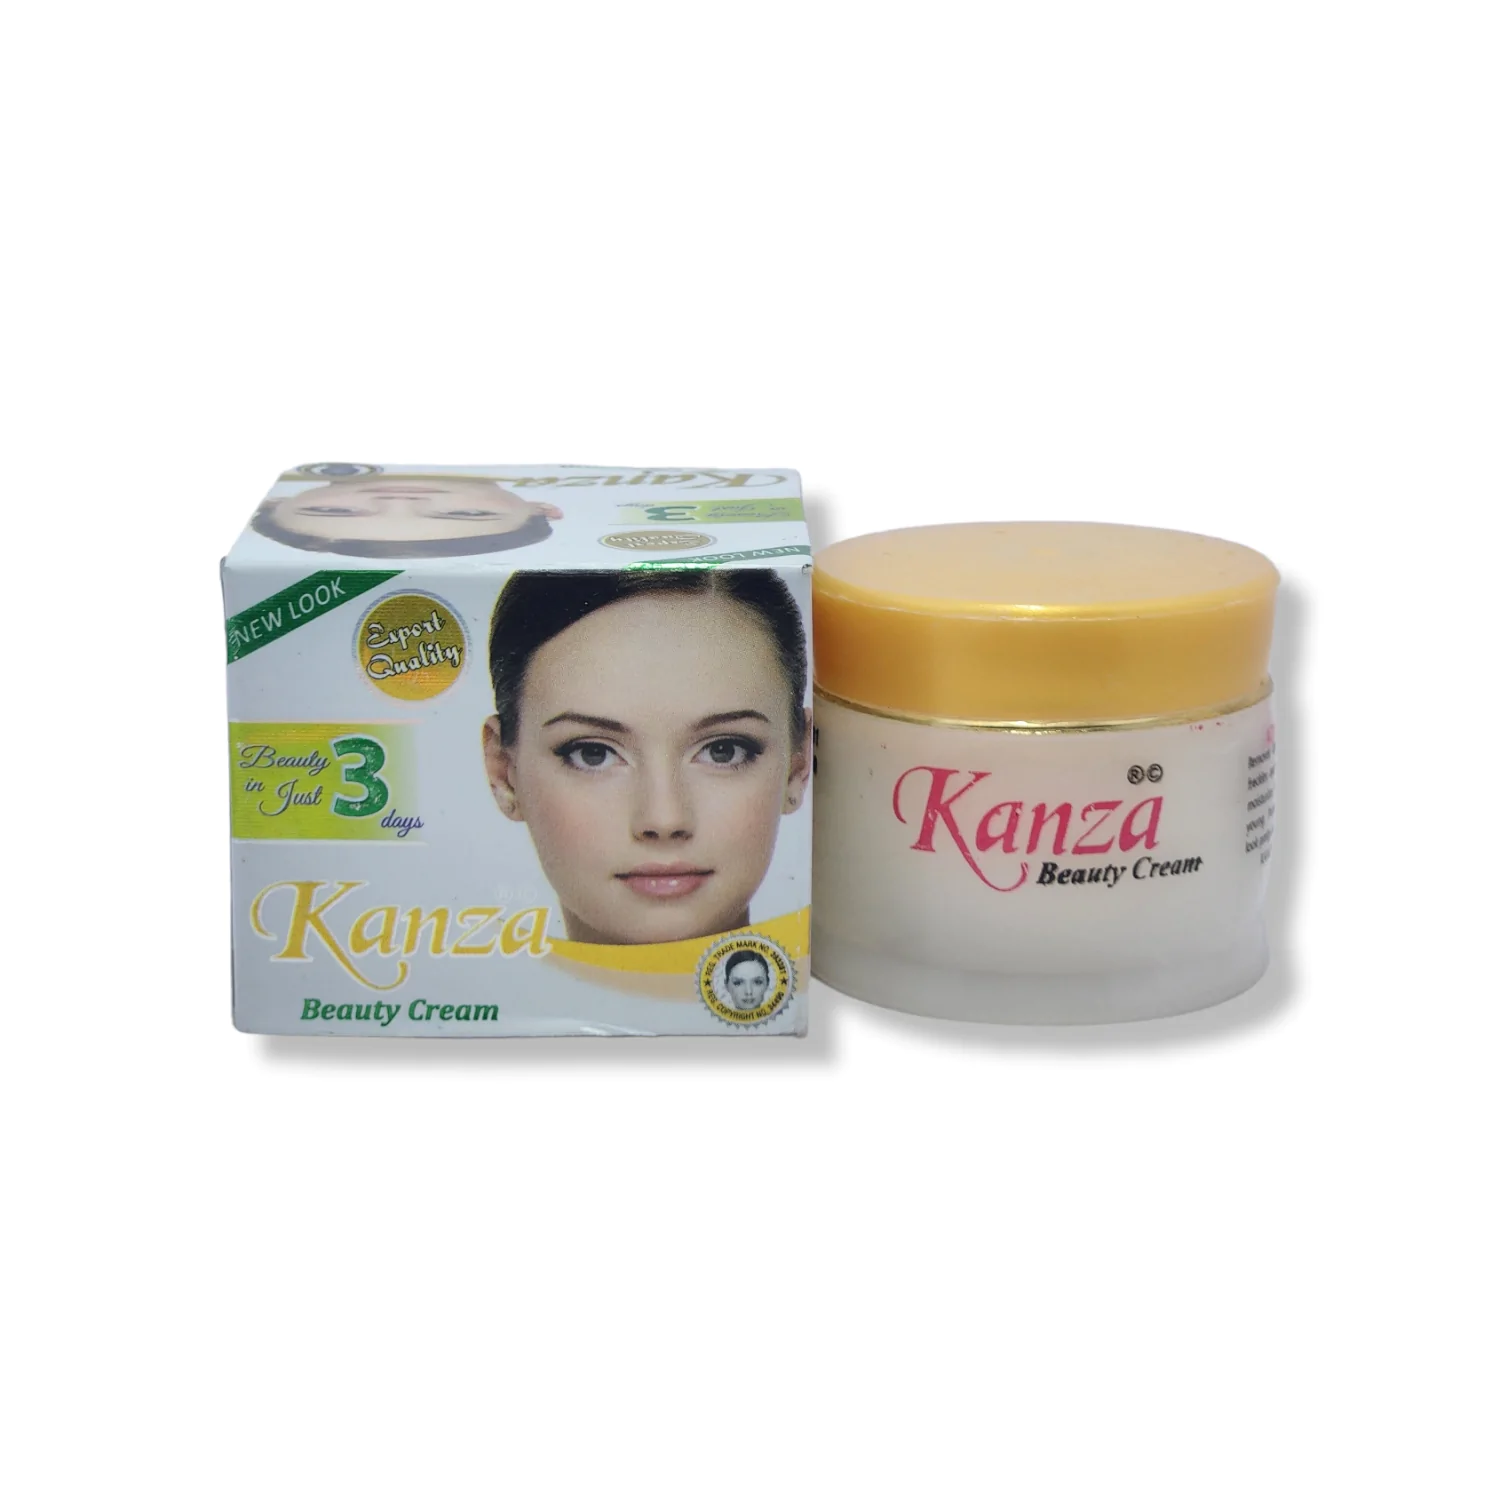 Sa Beauty best skin care products skin care products in india imported skin care products on sa beauties